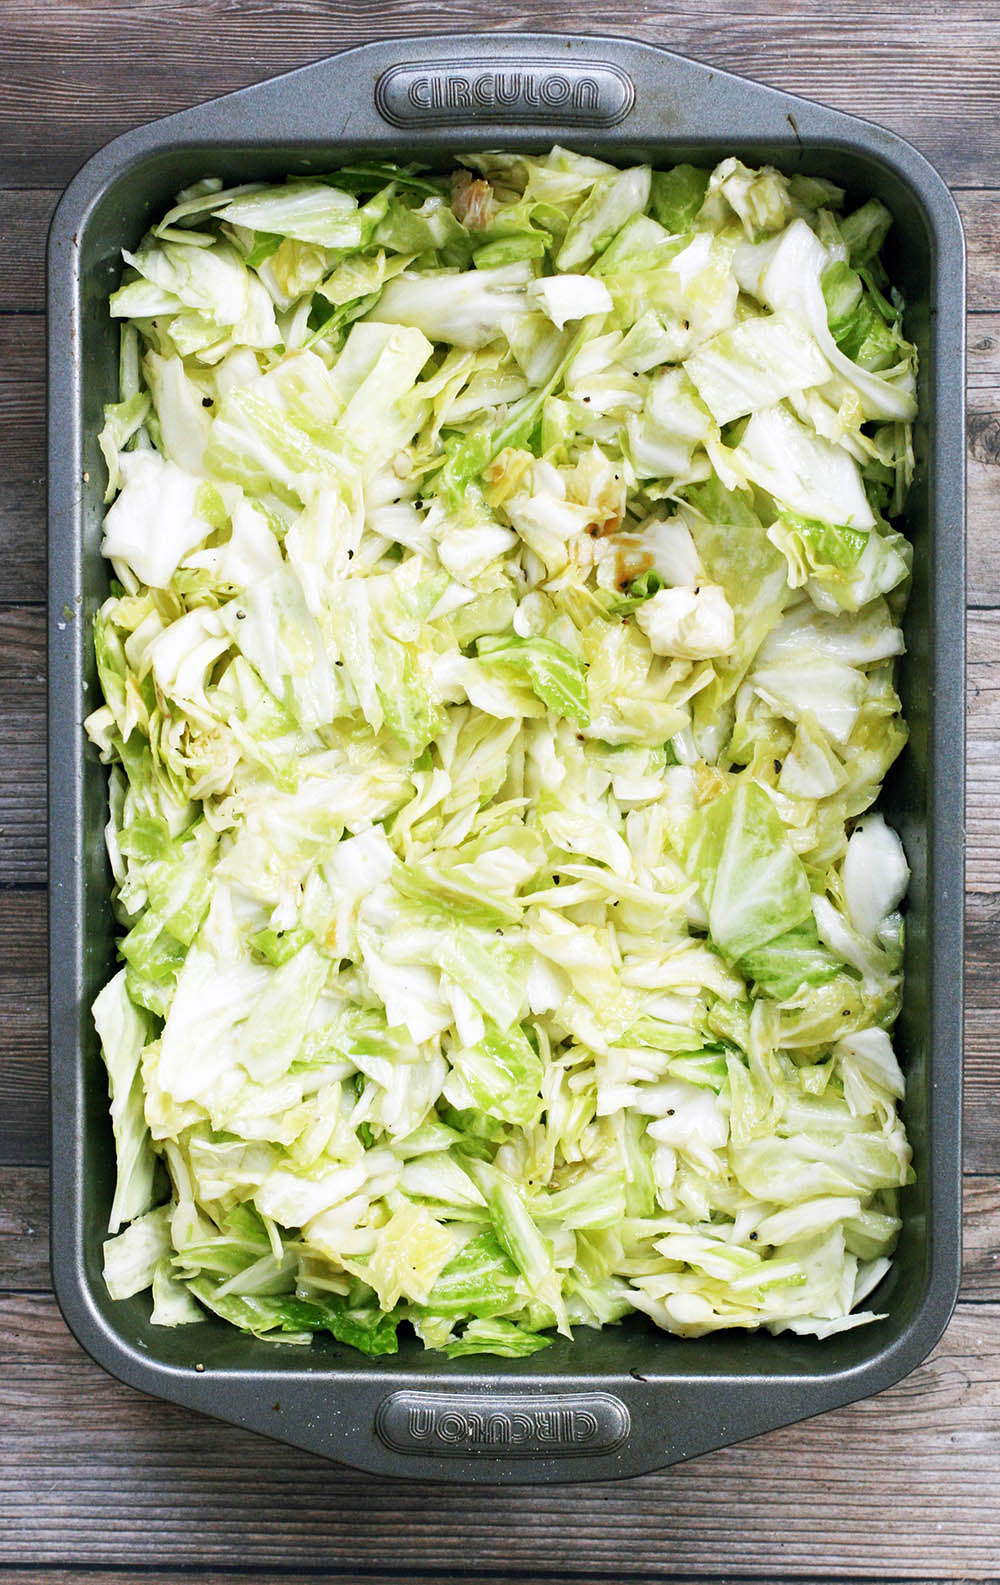 Savory roasted cabbage recipe: Click through for instructions!